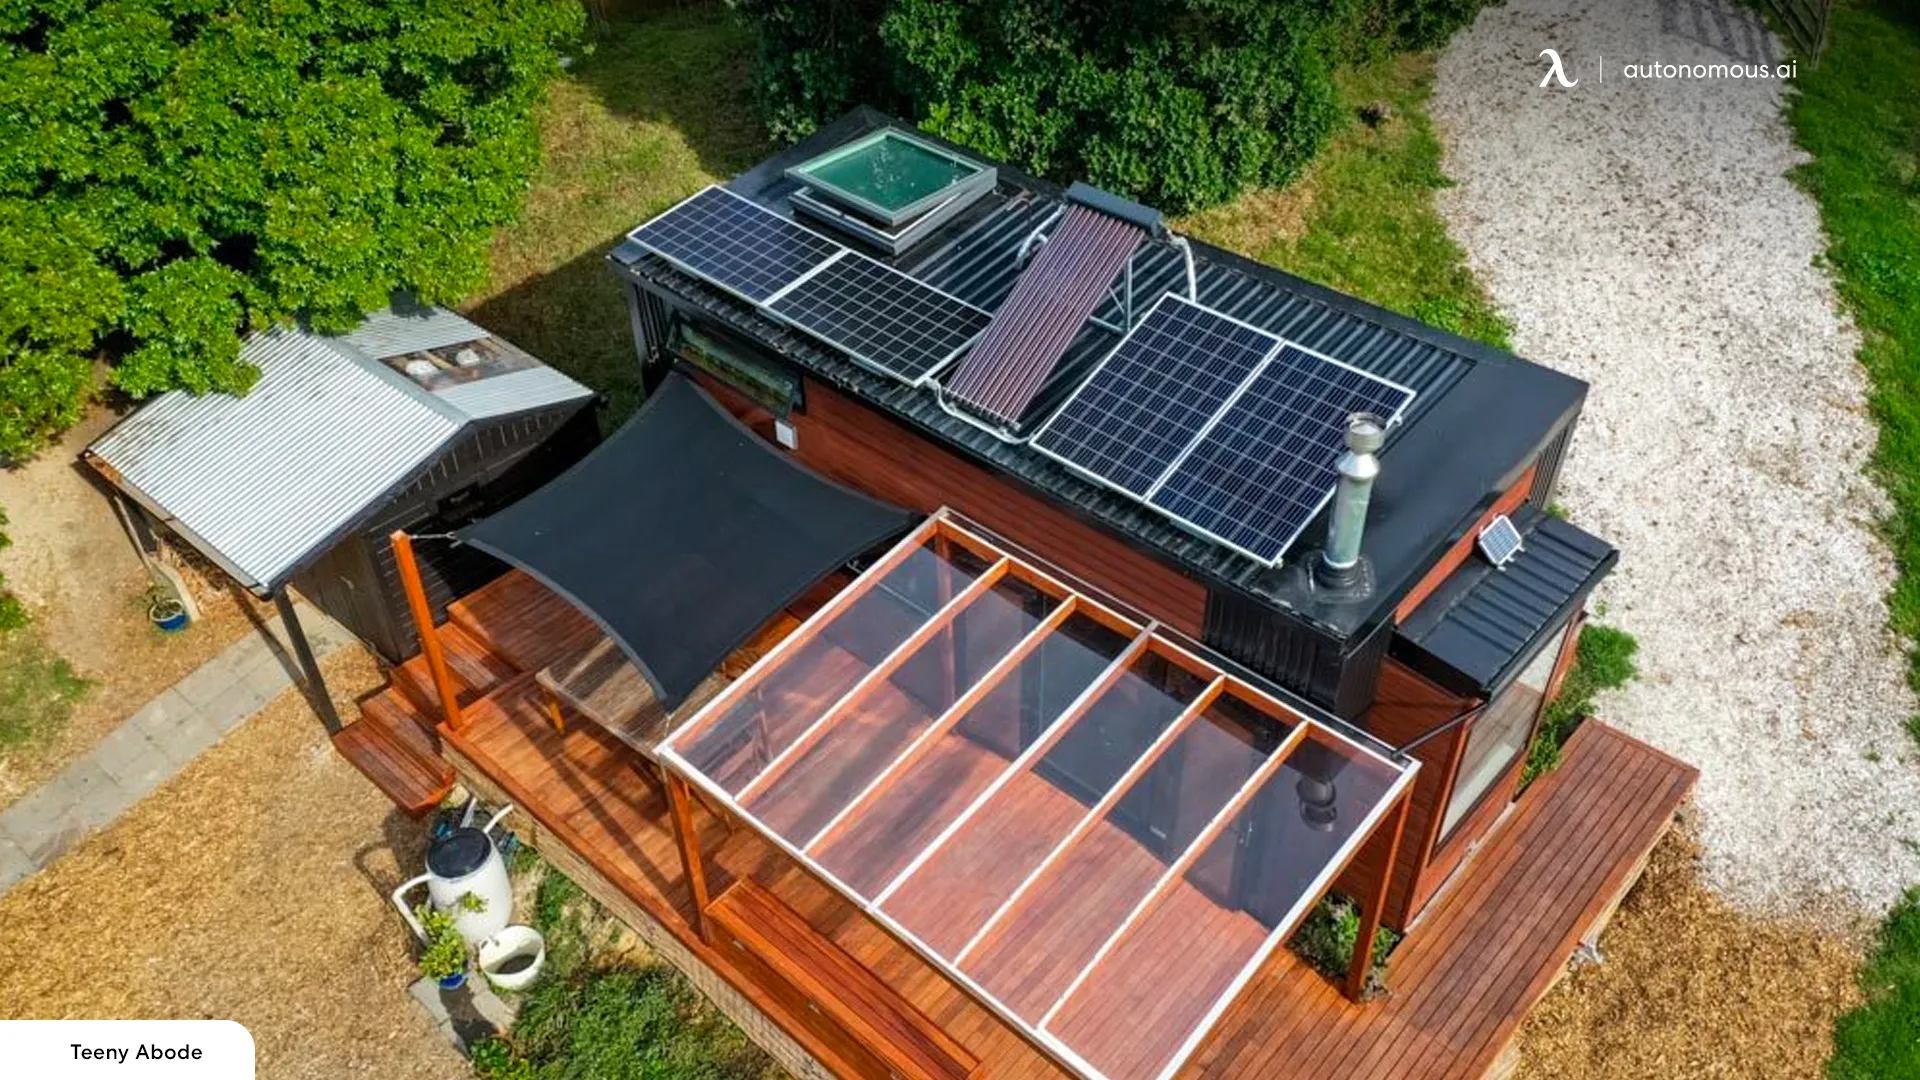 Install the panels on your tiny house roof